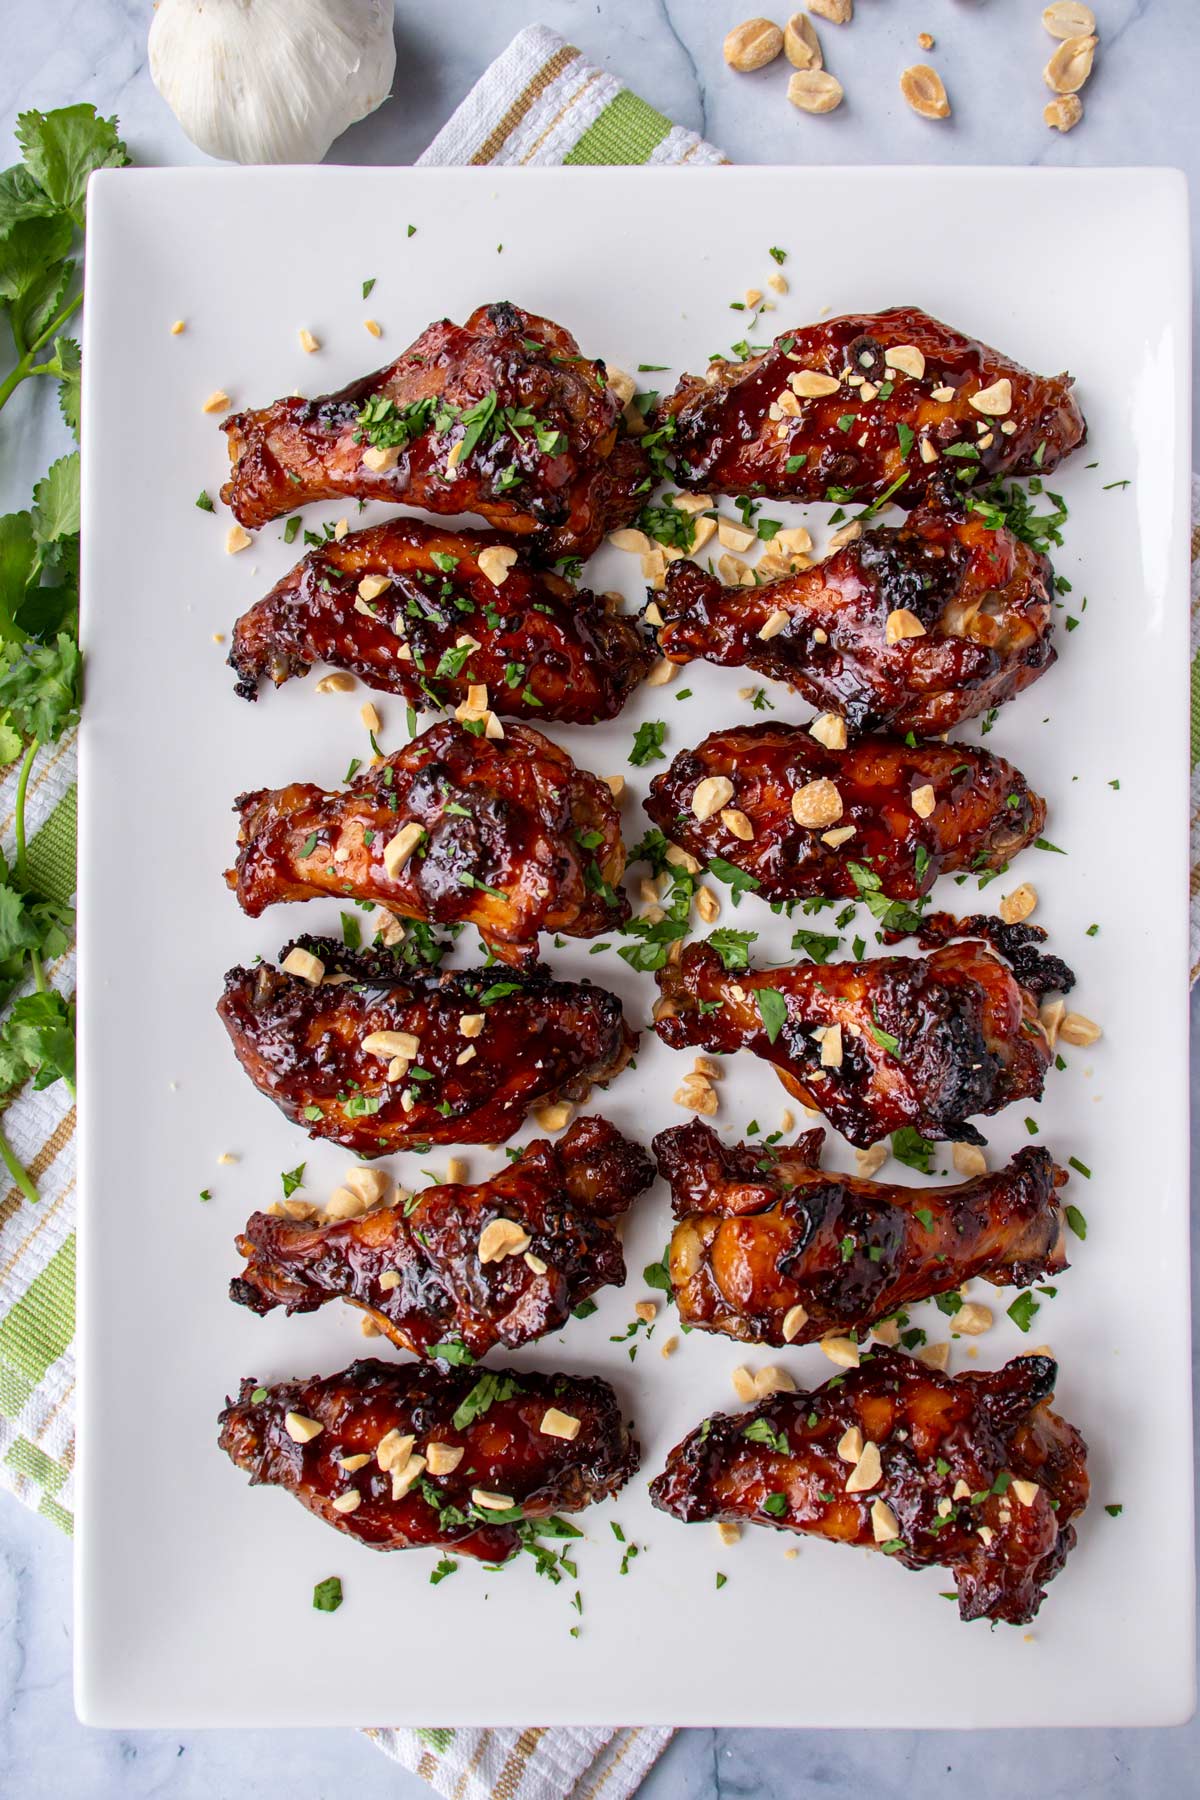 A white rectangular platter of dark brown glazed chicken wings on a striped towel.